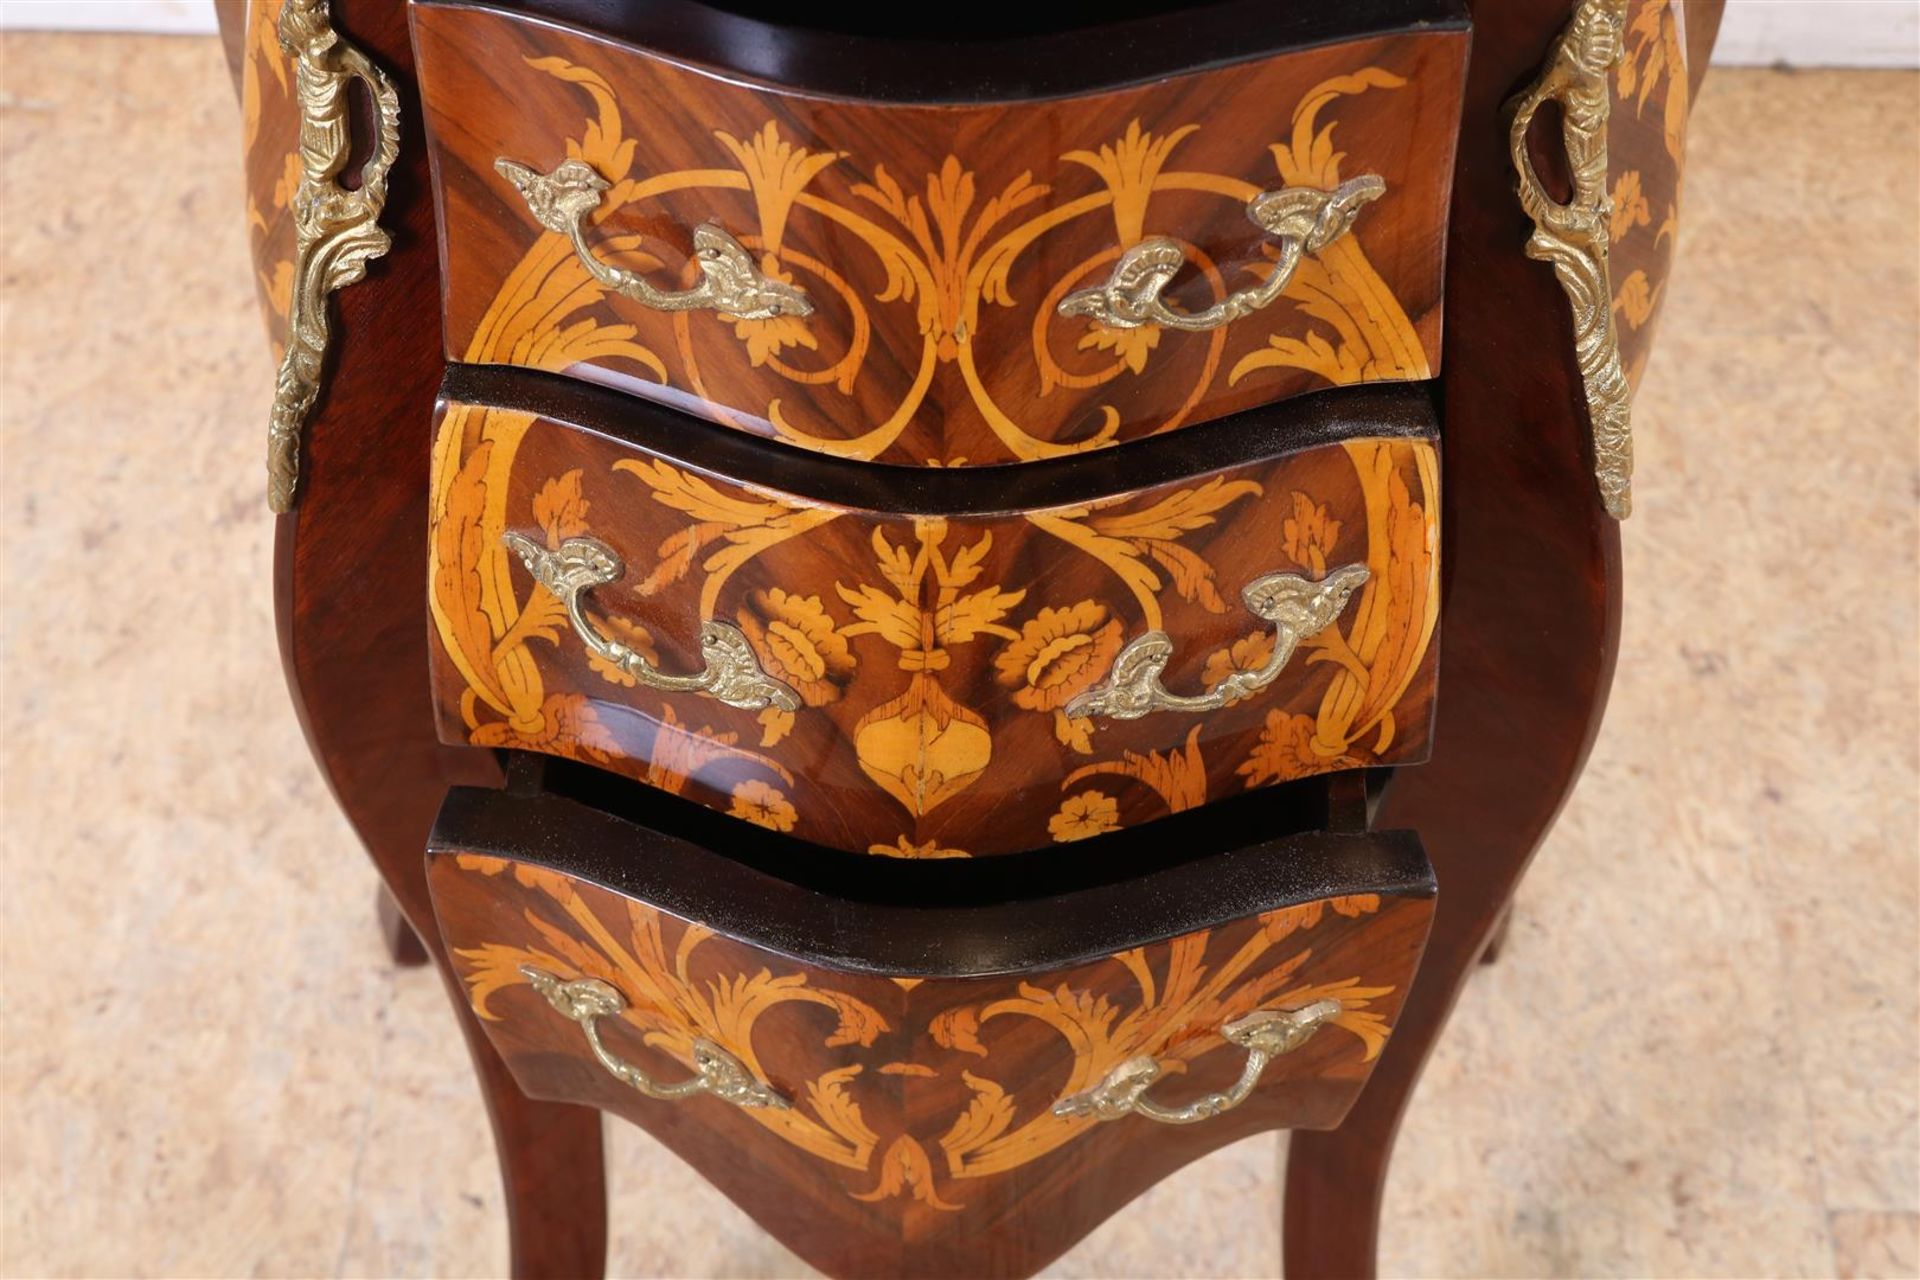 Mahogany glued Louis XVI style commode under marble top with 3 drawers and trimmed with bronze - Image 3 of 4